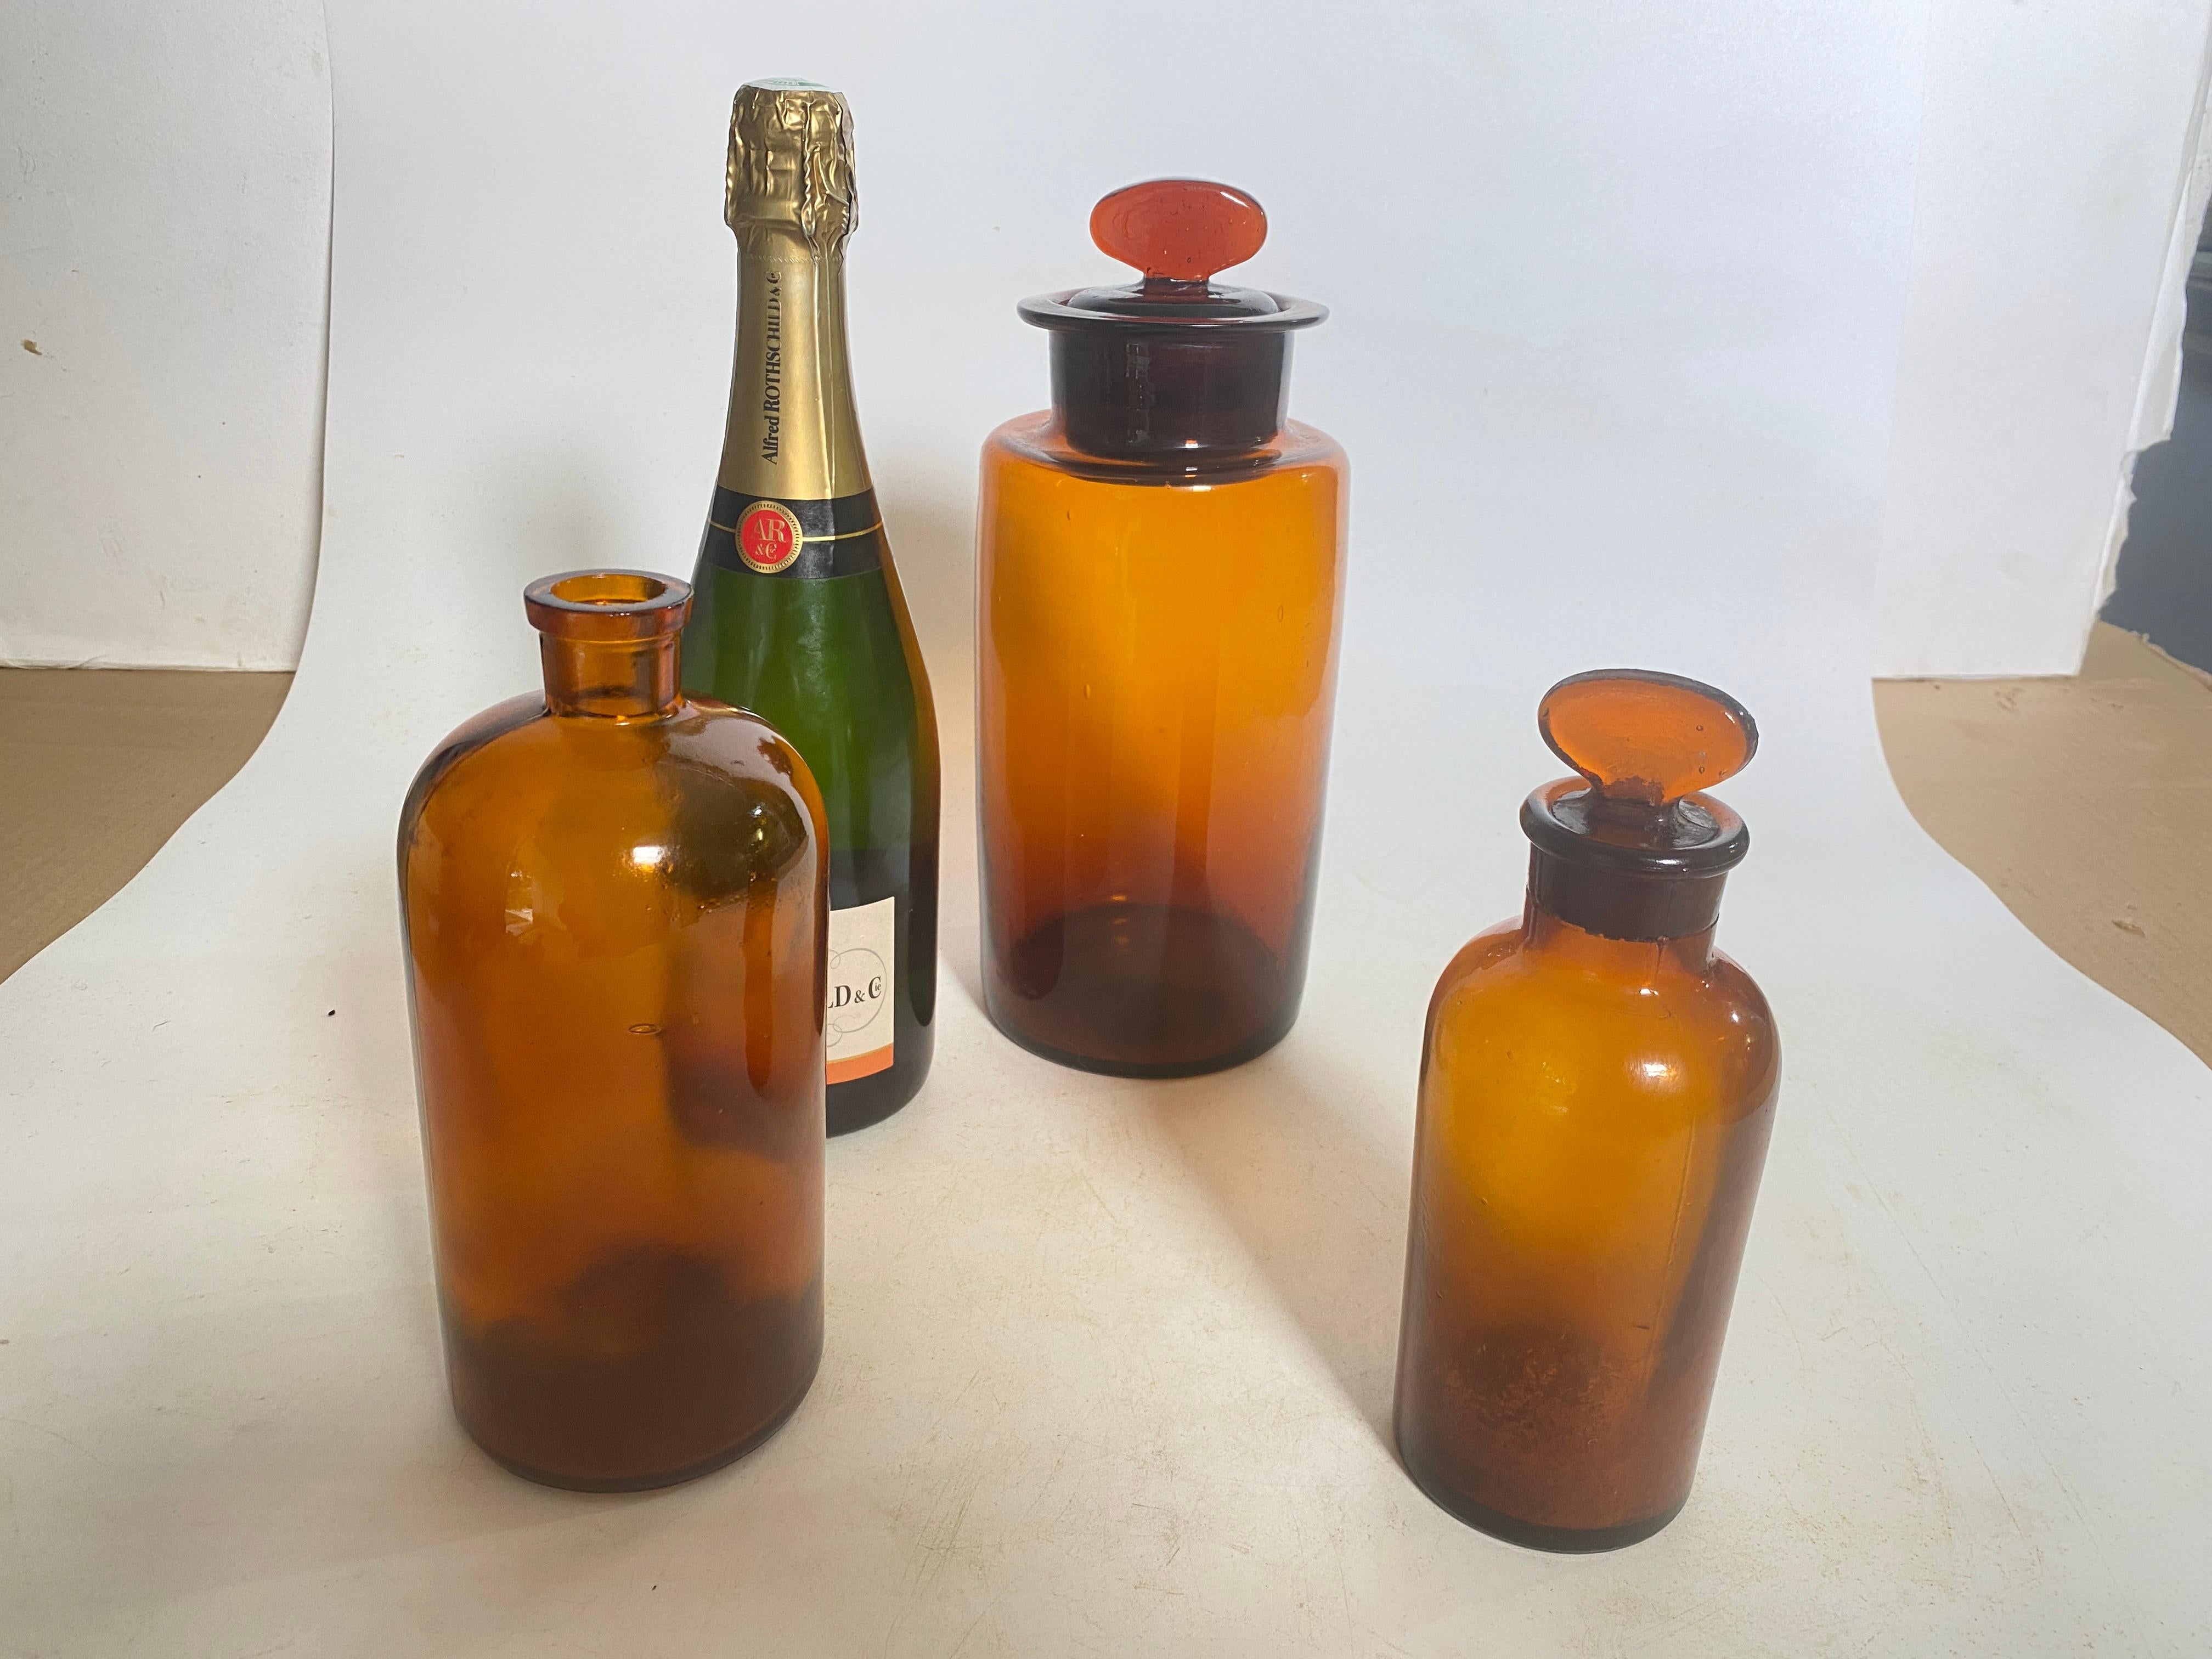 French Cobalt Orange Pharmacy Bottles. Decotatives Bottles.
Set of 3.
One of the caps does not come off the bottle.
